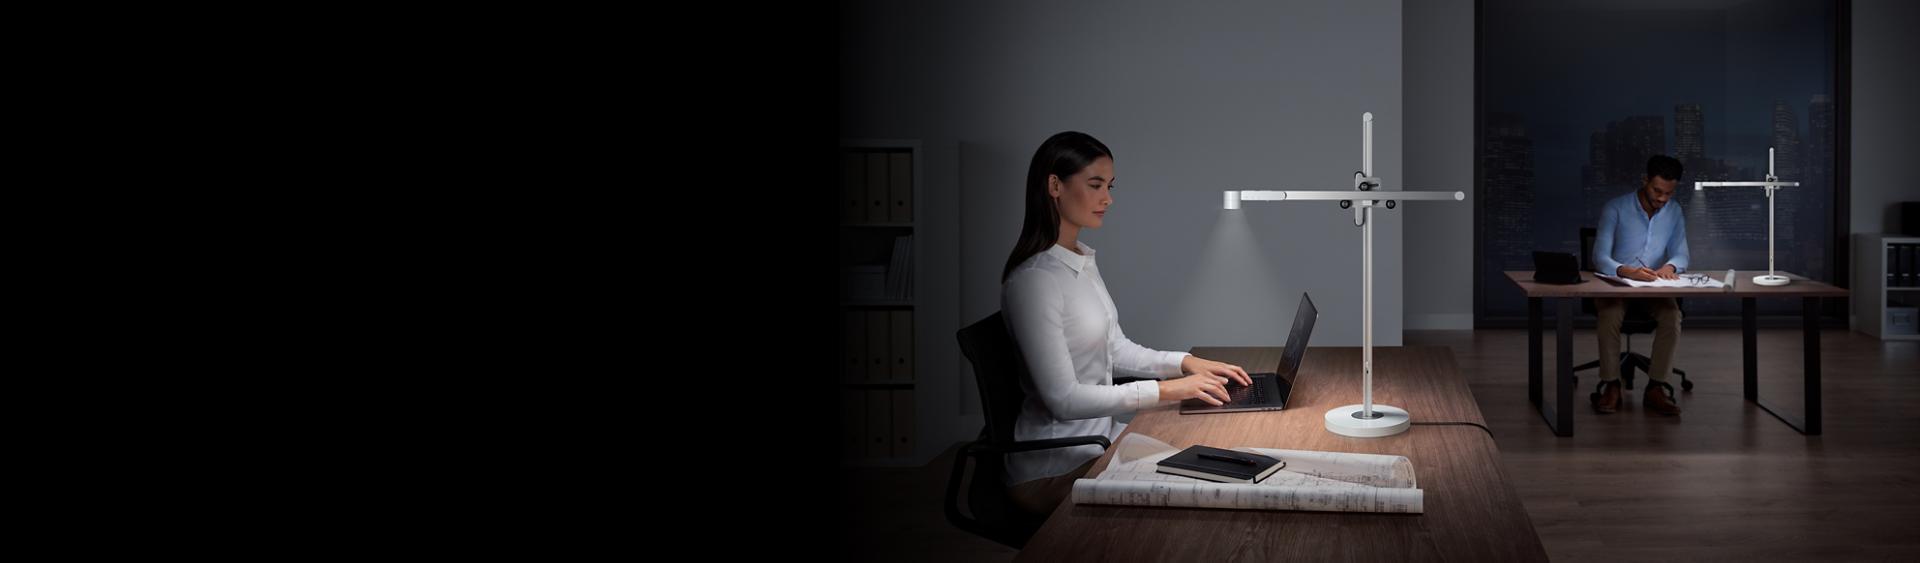 Two people at work using Dyson Lightcycle desk lights